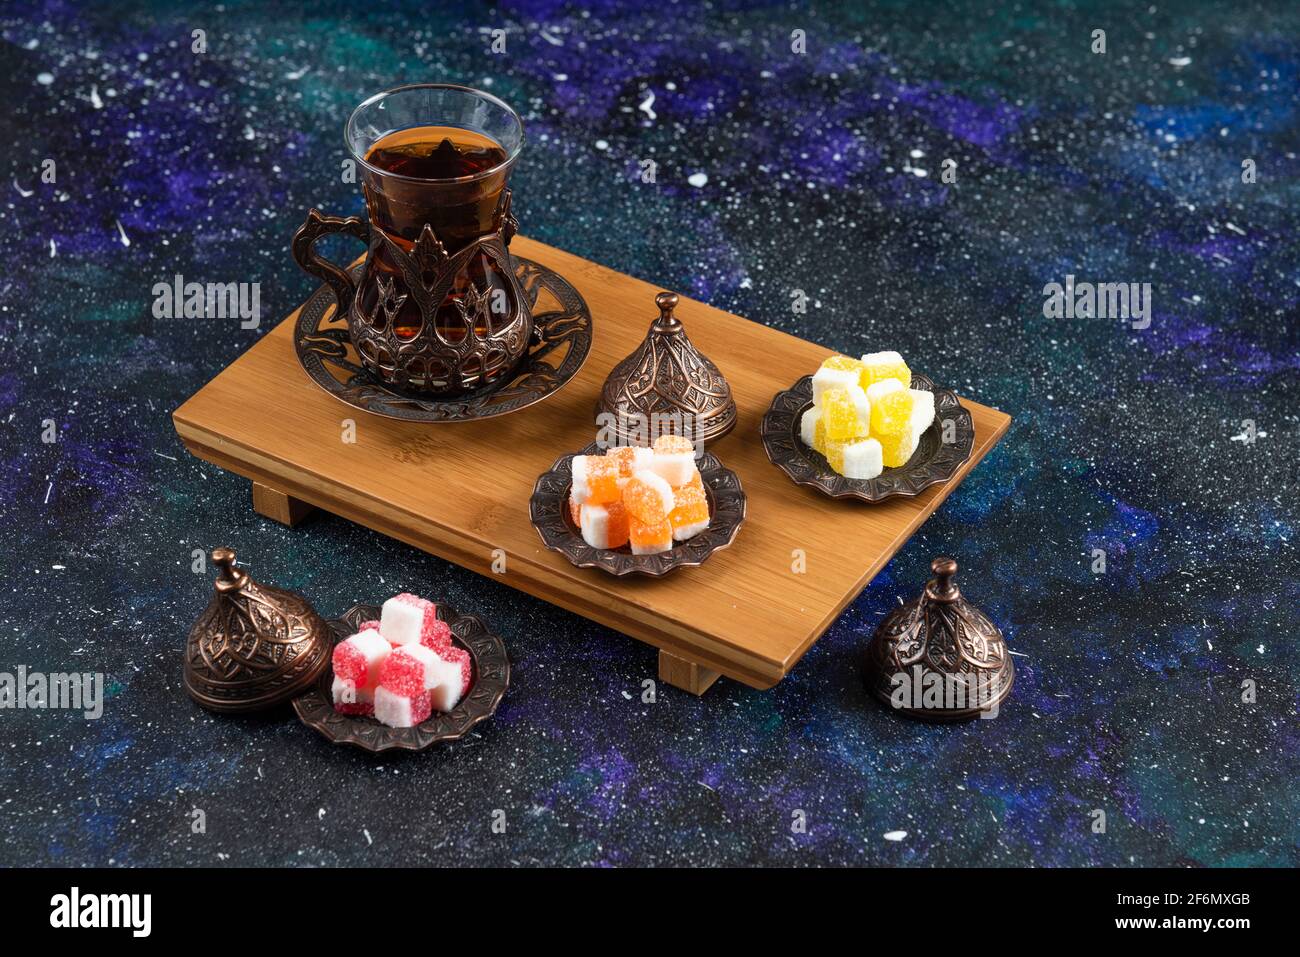 Tea set with Turkish delights on wooden board on colorful background Stock Photo